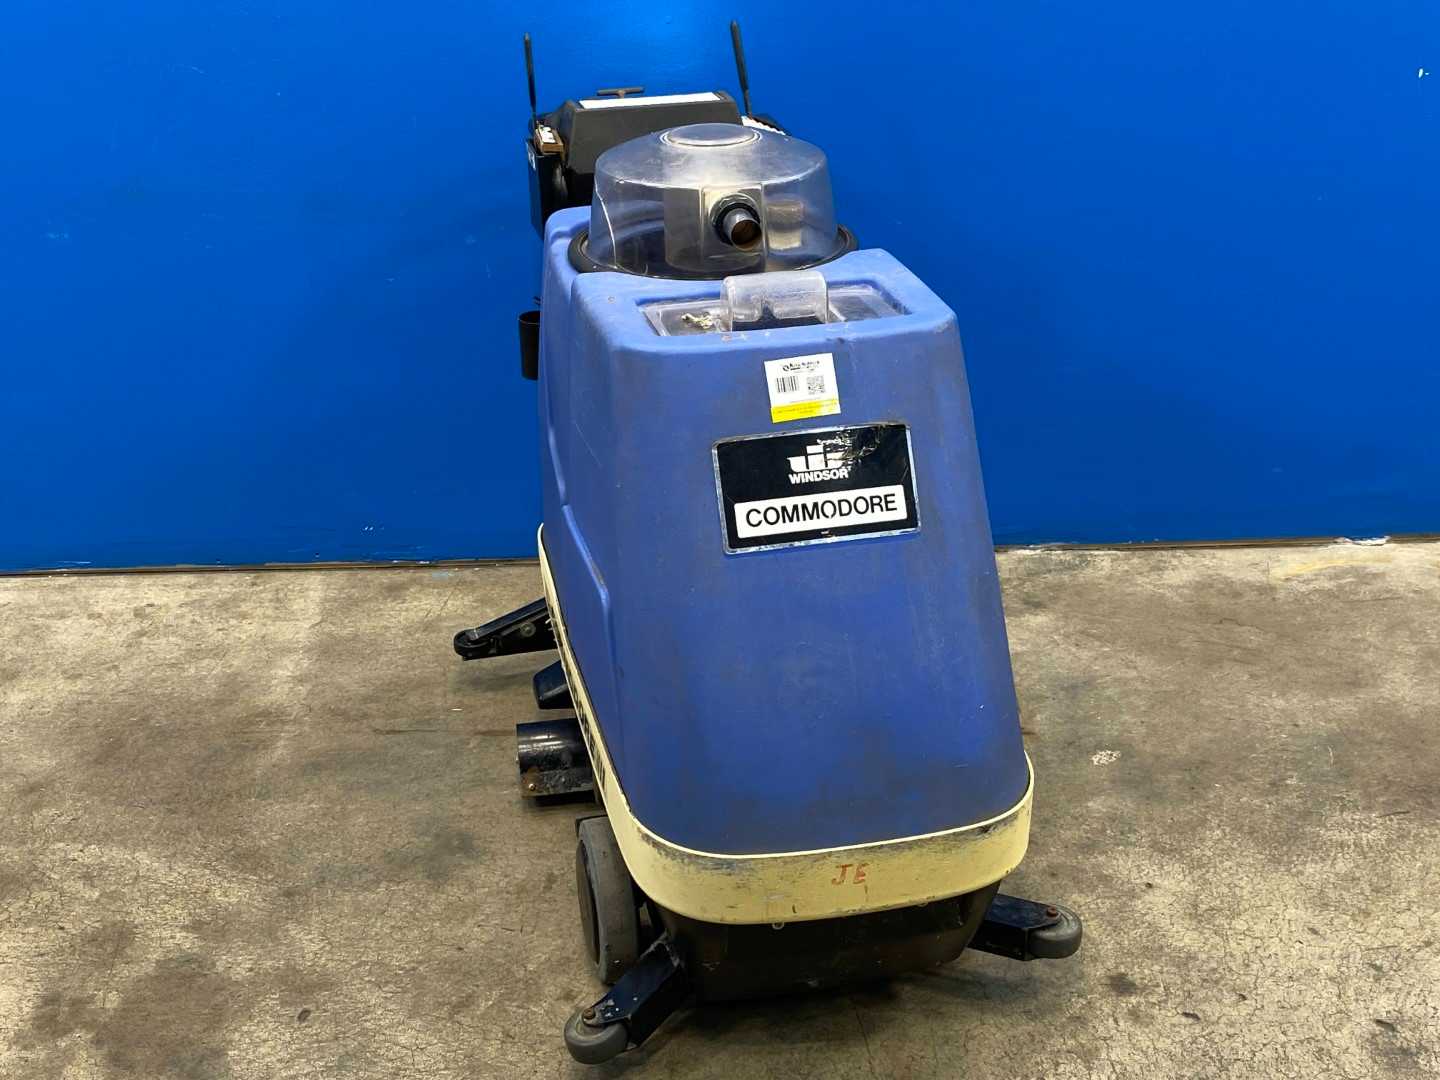 Windsor Commodore Fastraction Carpet Cleaner CMD